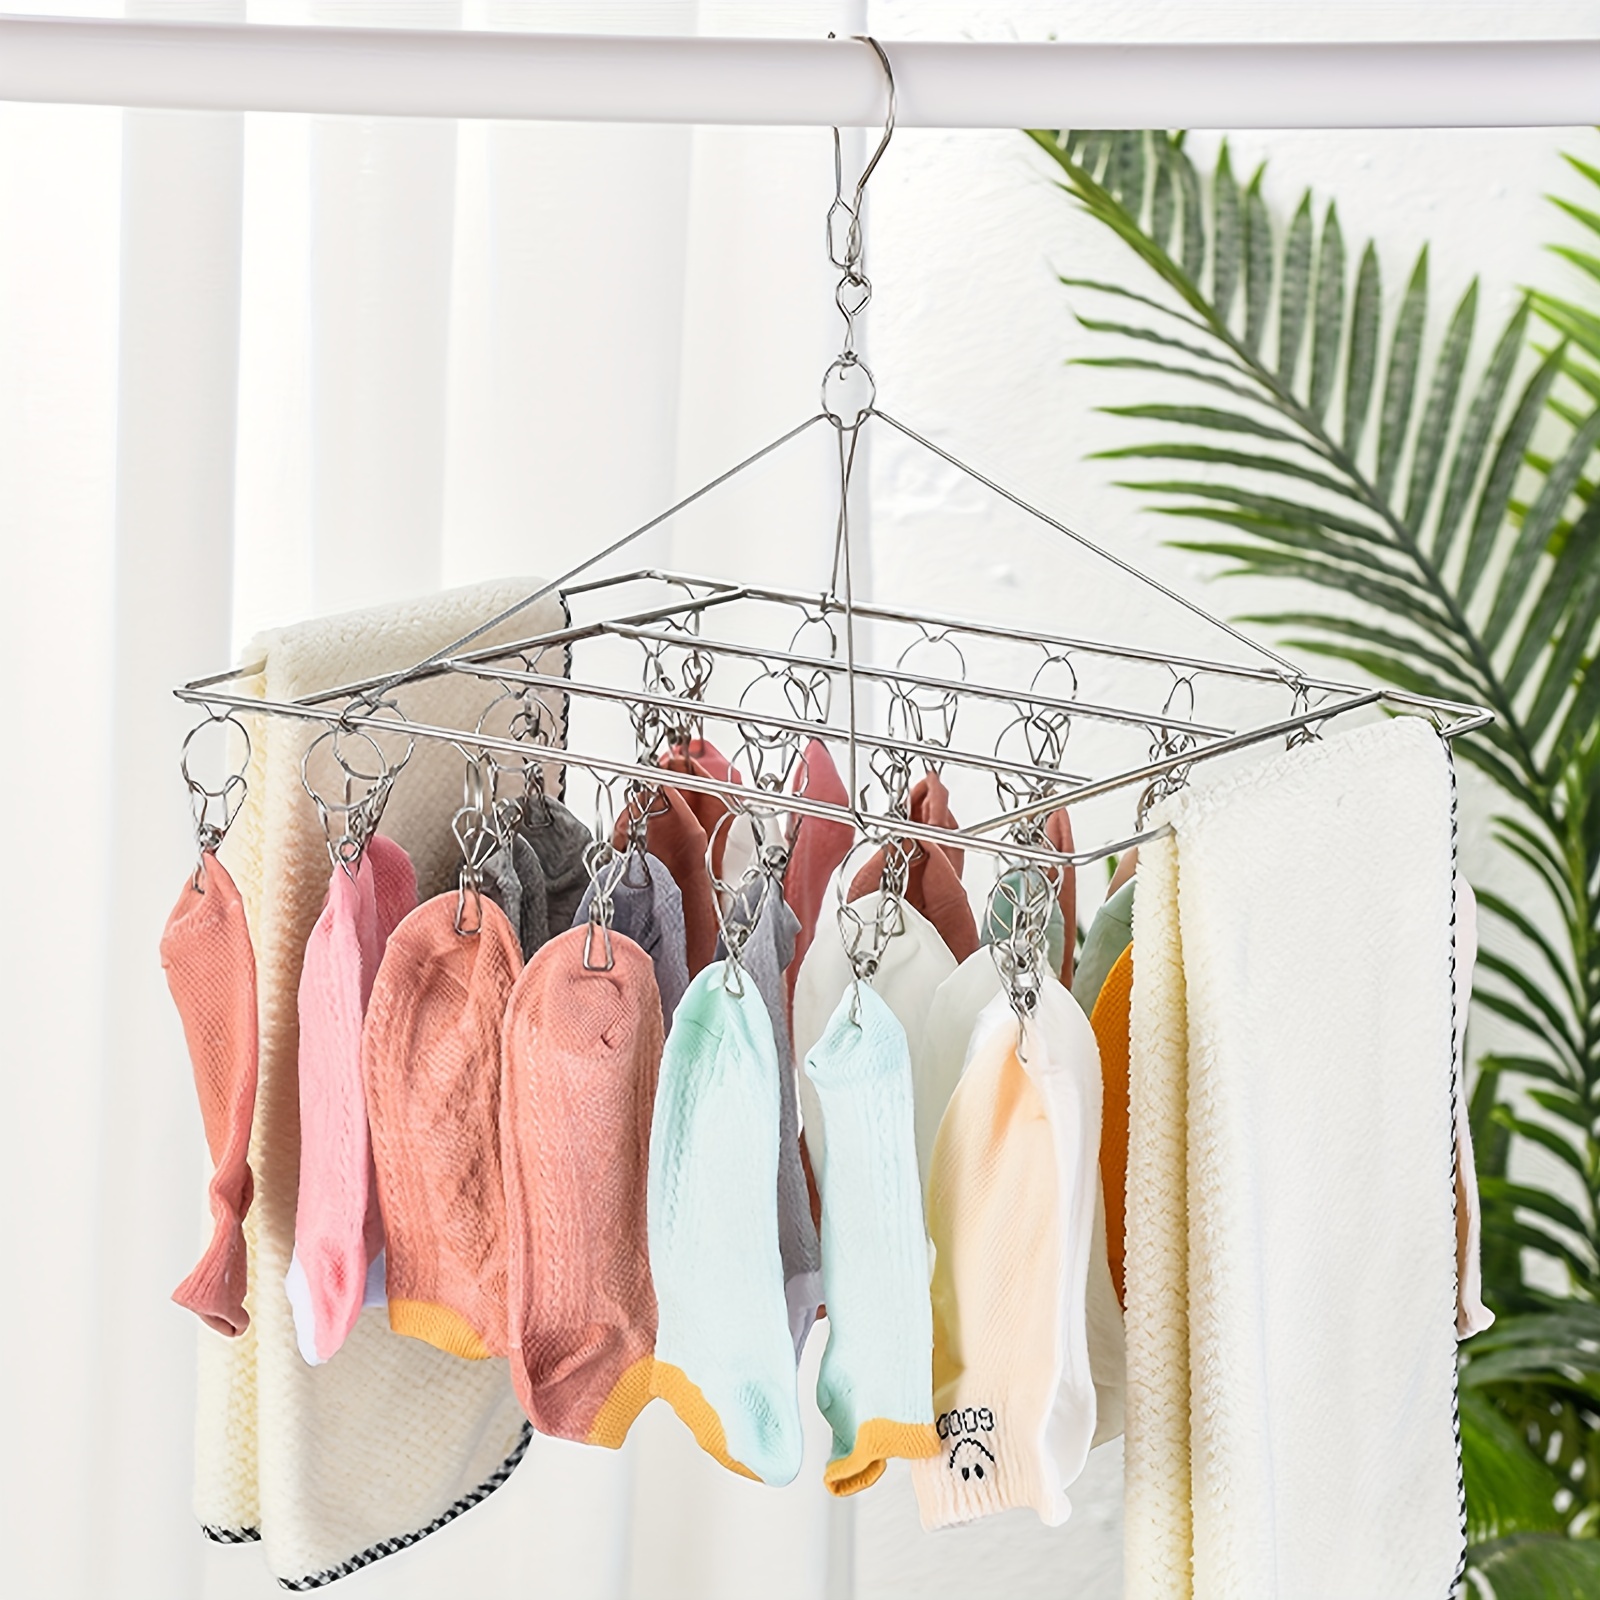 20 Pegs Laundry Clothes Hanging Rack for Drying Clothing Socks Underwear Bra  Drying Rack Hanging Clothes Hanger，Stainless Steel Clothespins 